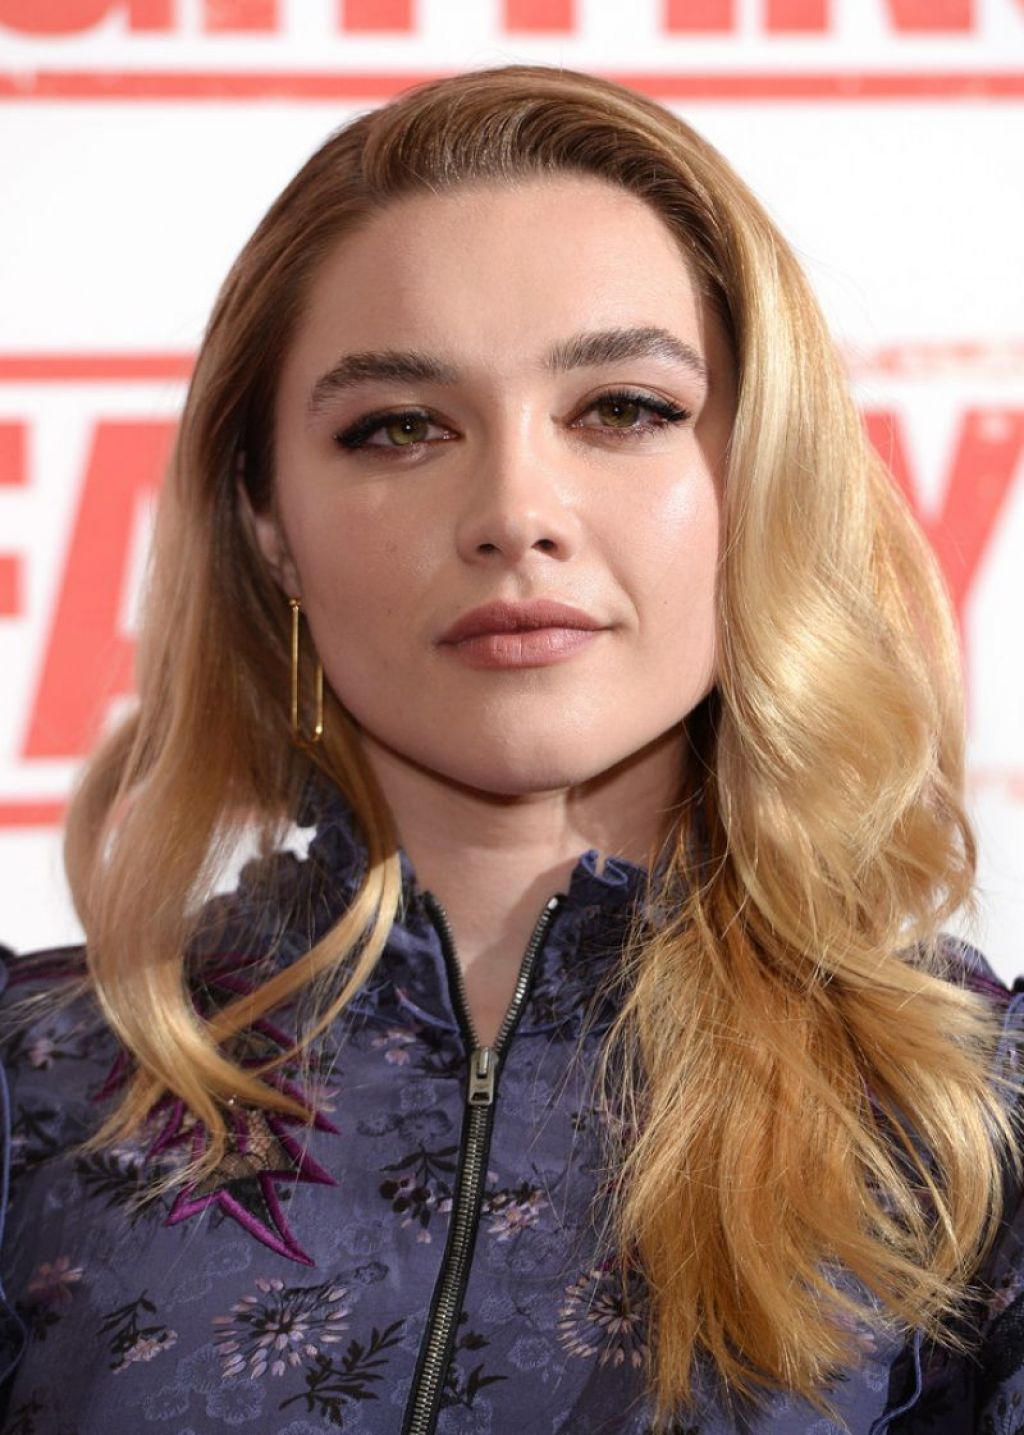 Florence Pugh - "Fighting With My Family" Premiere in London • CelebMafia